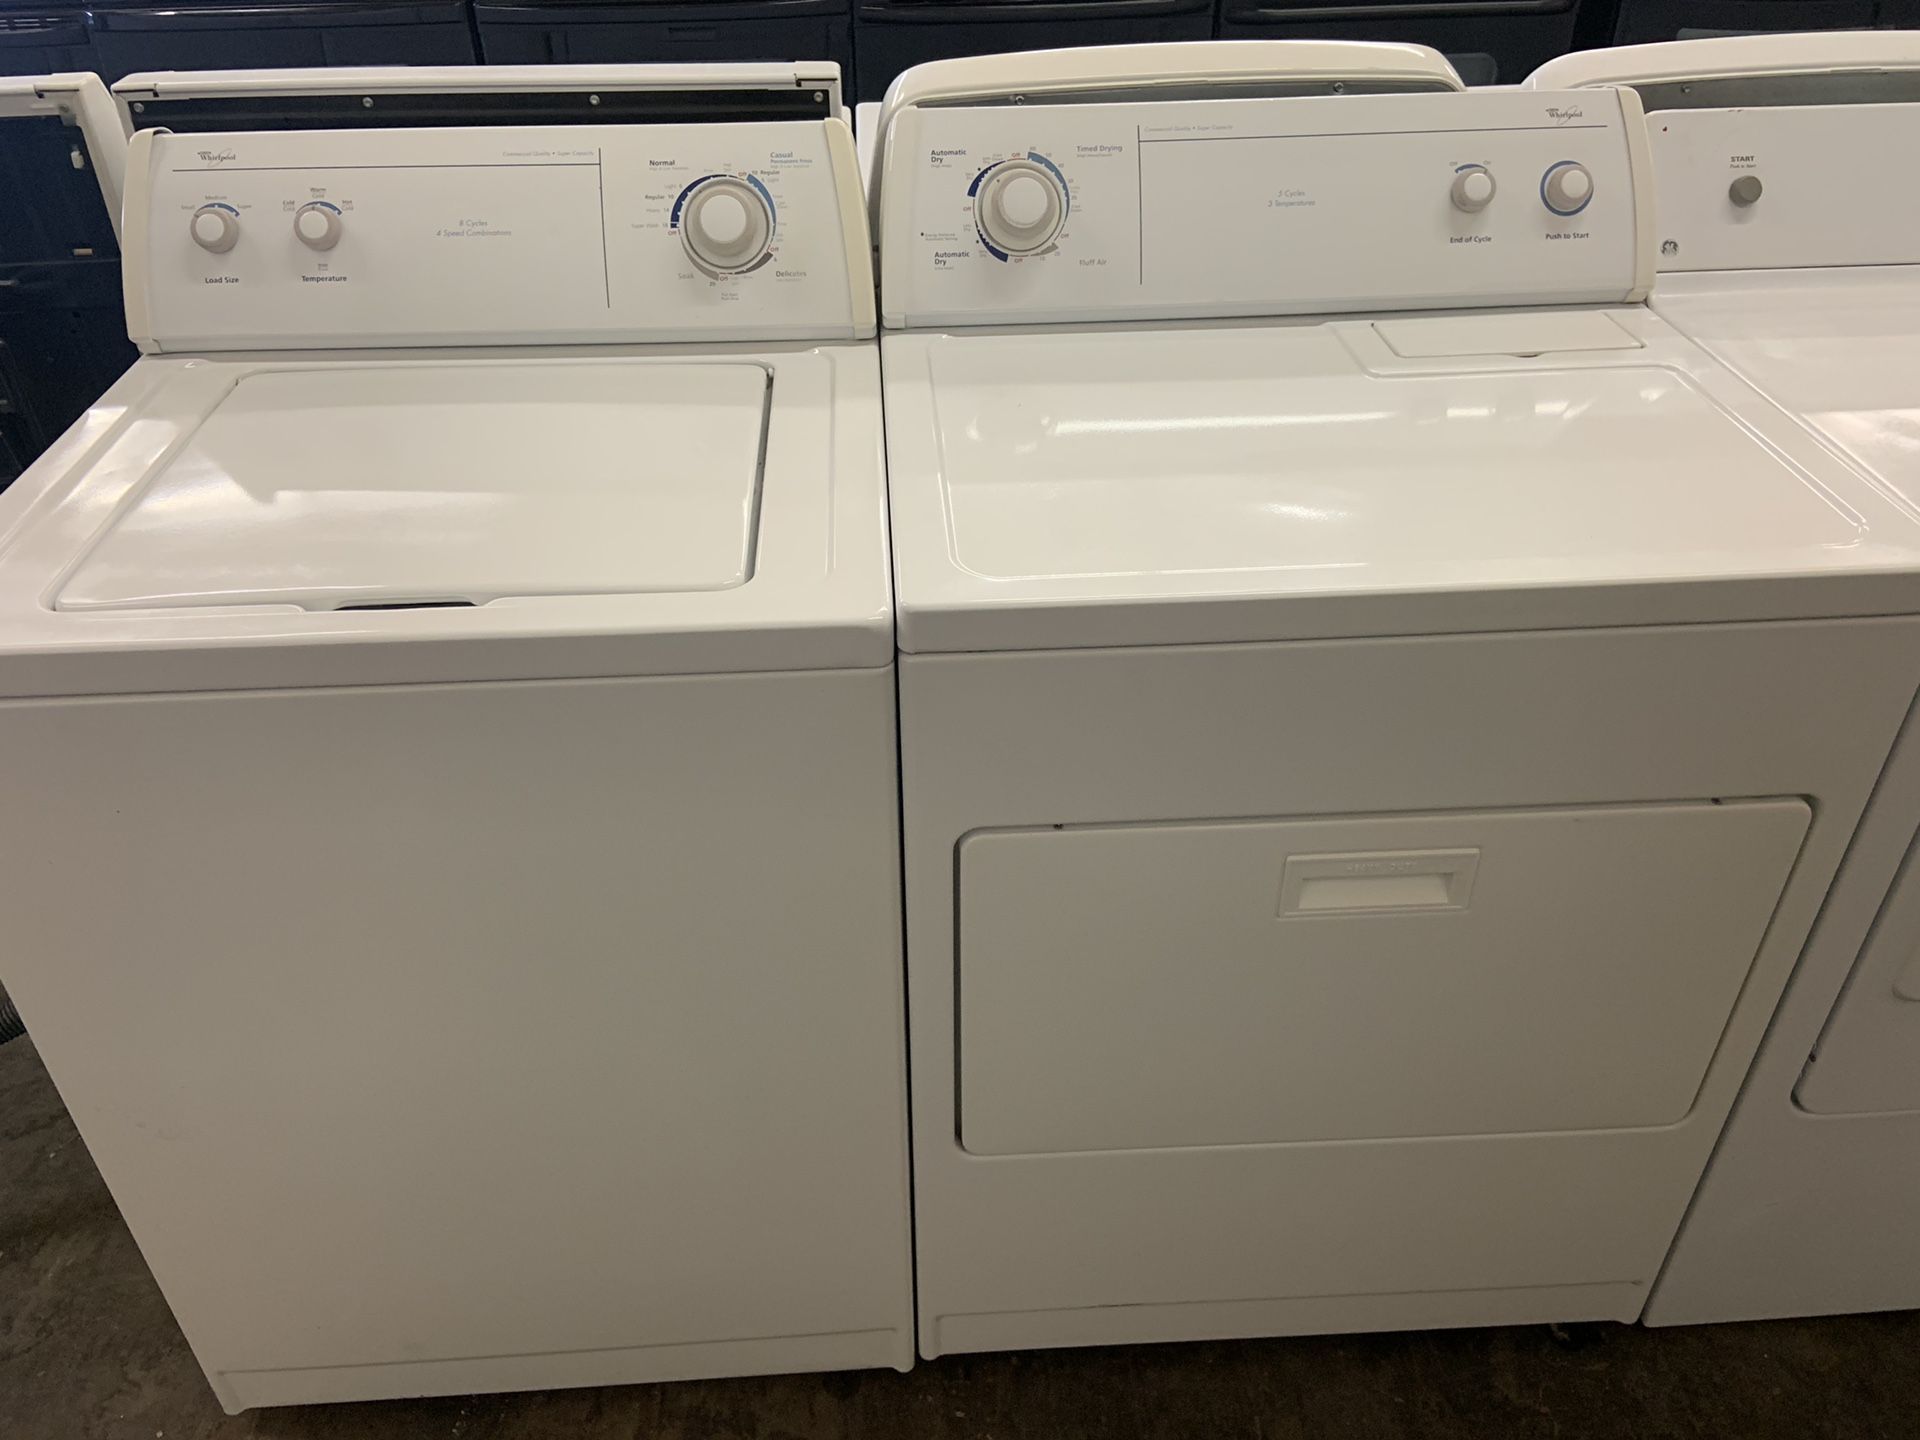 Washers and dryer sets